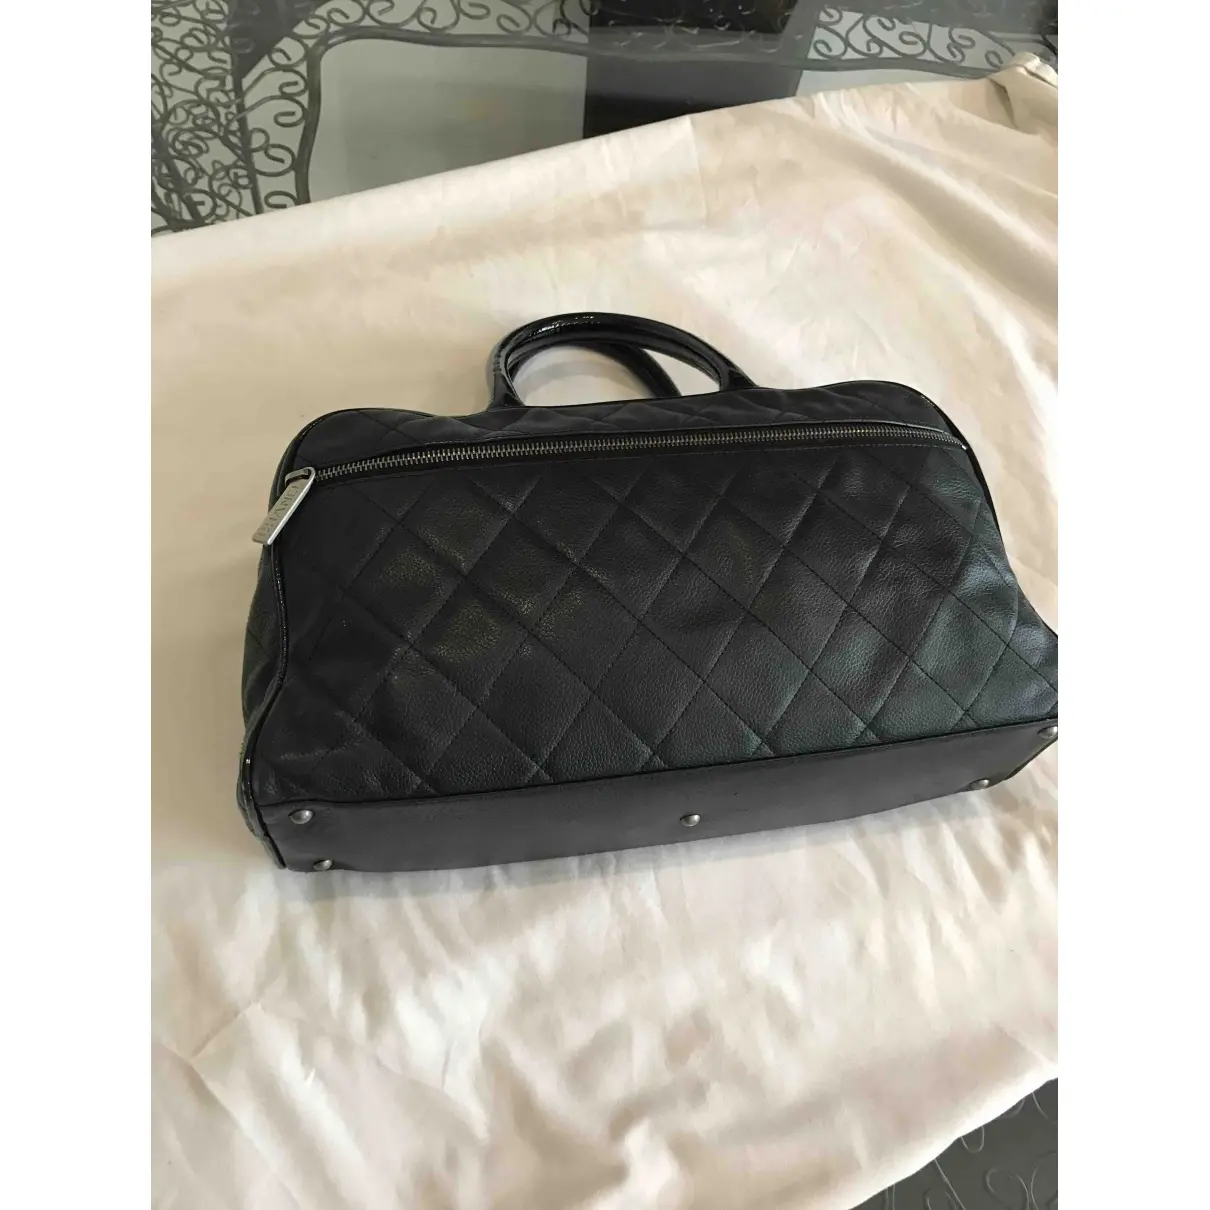 Chanel Cambon leather 24h bag for sale - Vintage